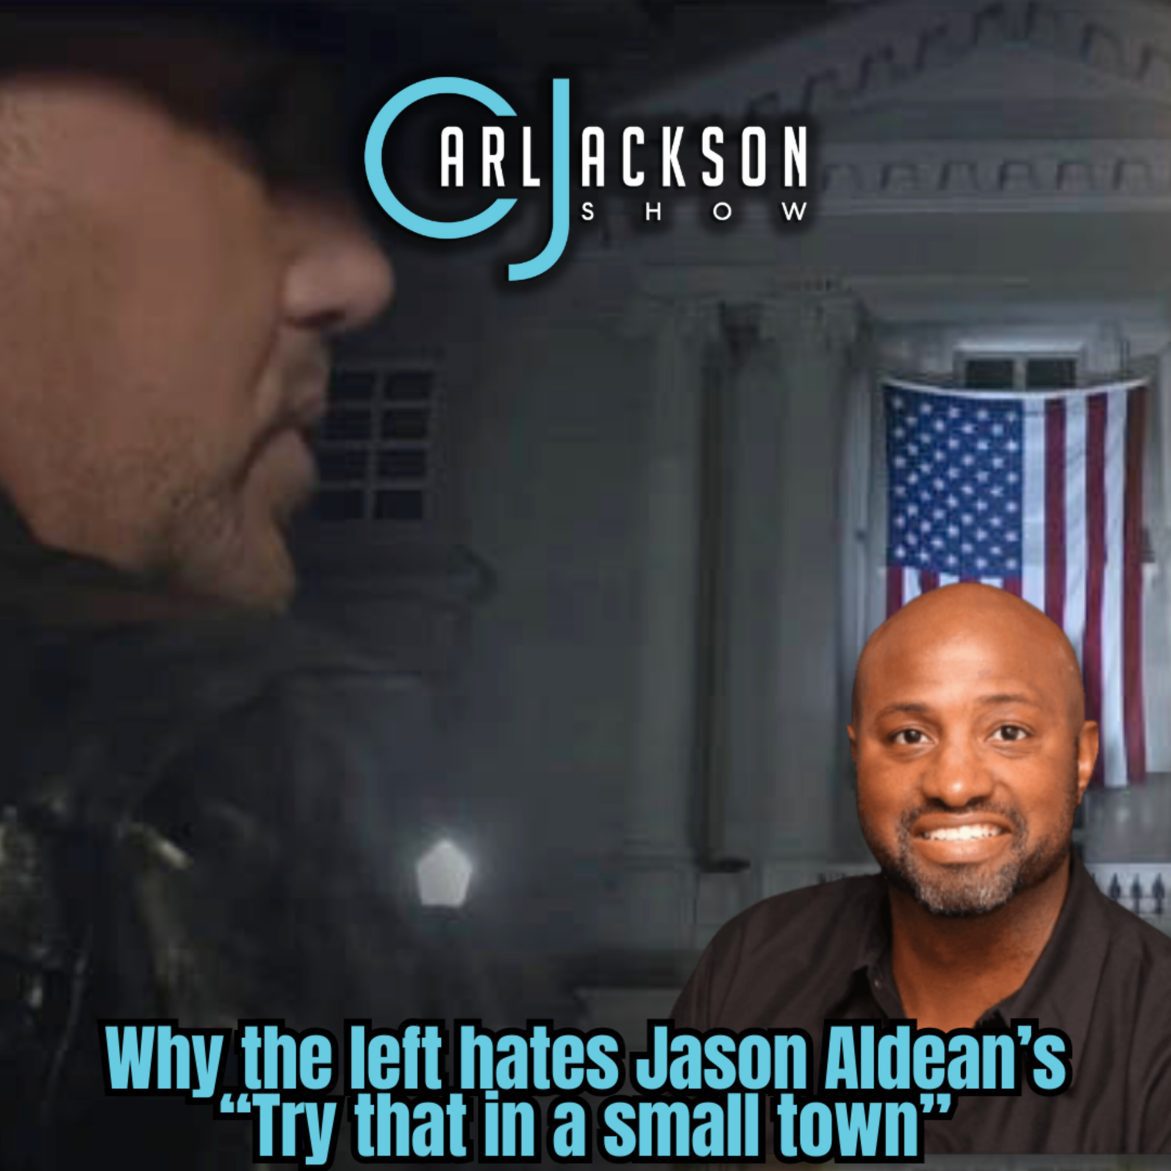 Black Podcasting - Why the left hates Jason Aldean’s “Try that in a small town” music video